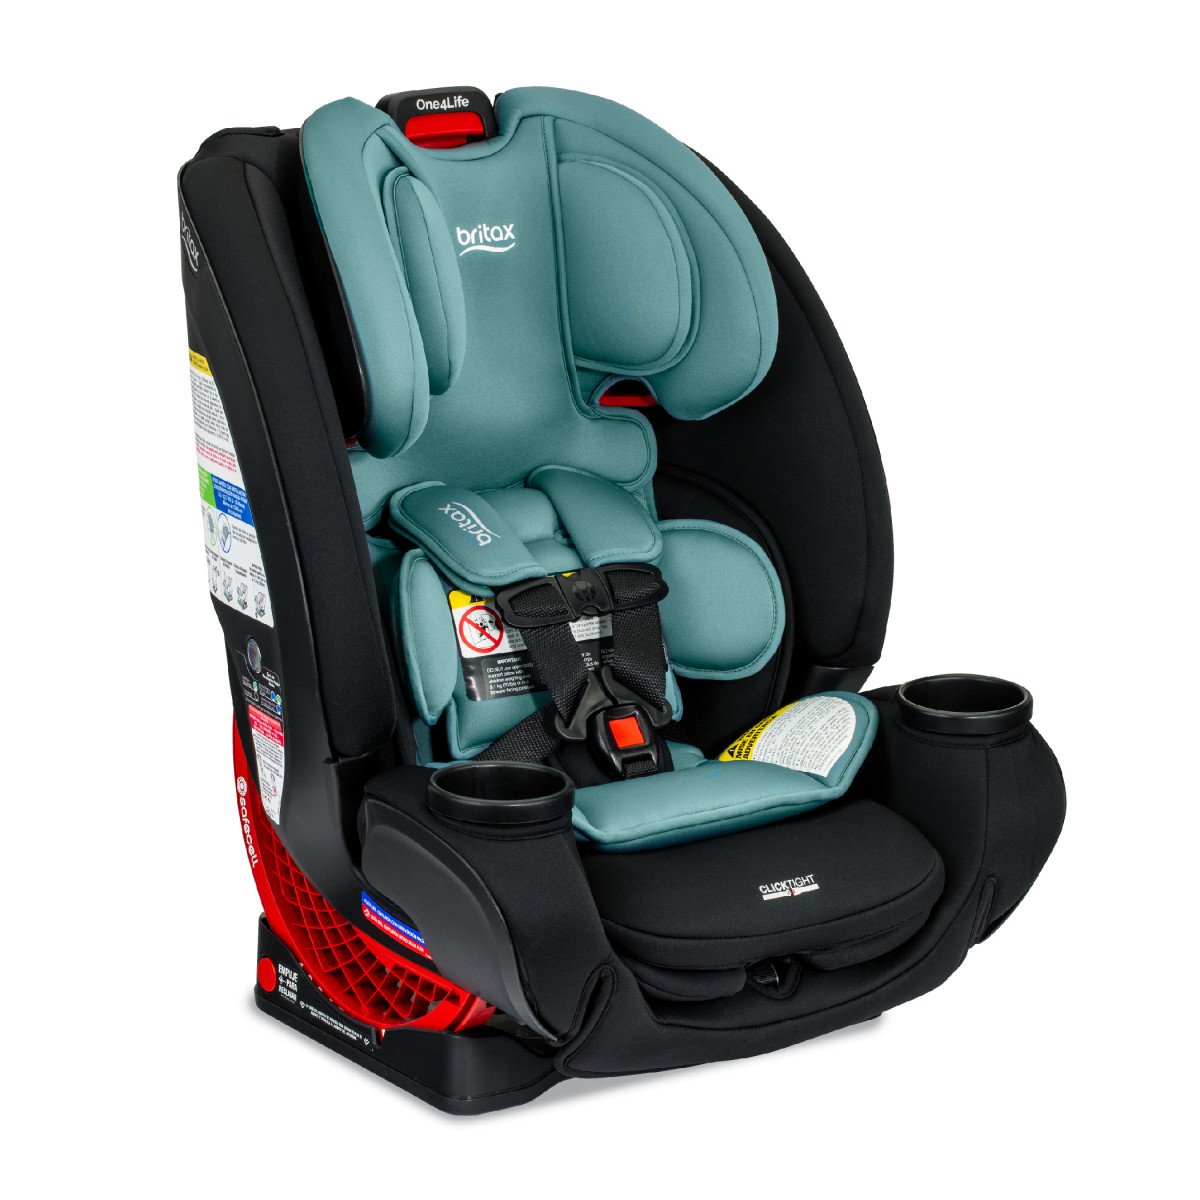 Jade Onyx Right Facing One4Life All-In-One Car Seat (Copy)